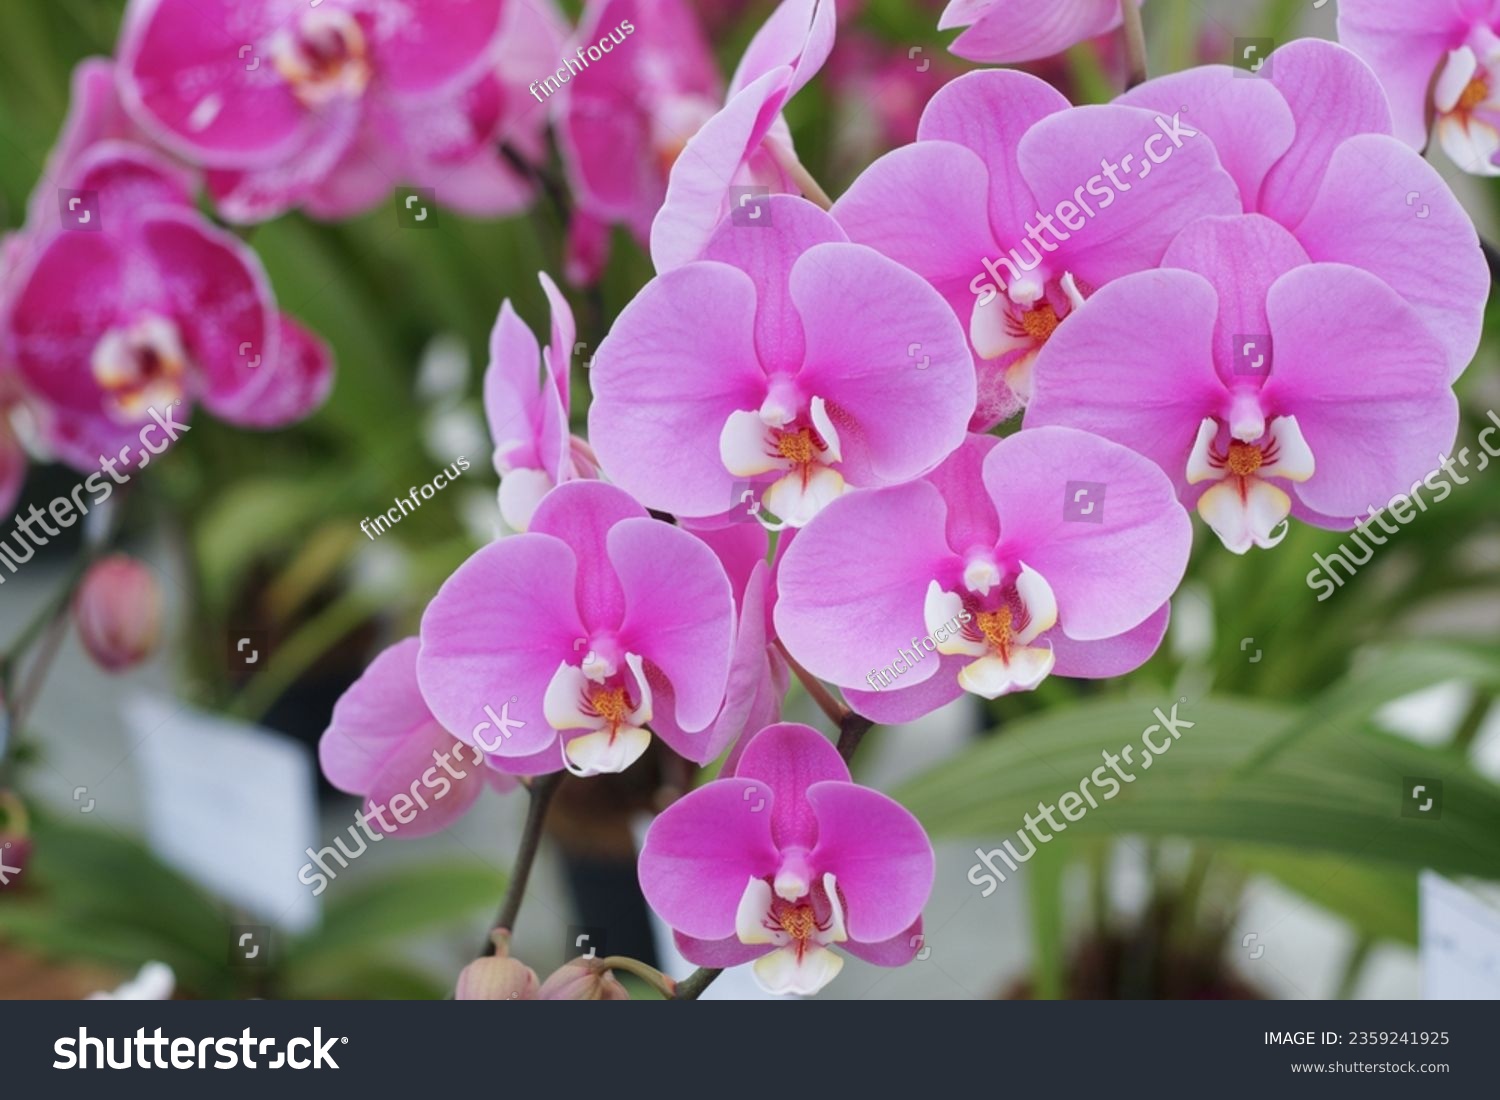 Natural background with the beautiful orchids vibrant phalaenopsis at Nursery orchids in Thailand. Orchids and garden on nature background ideas concept.  Selective focus, free copy space. #2359241925